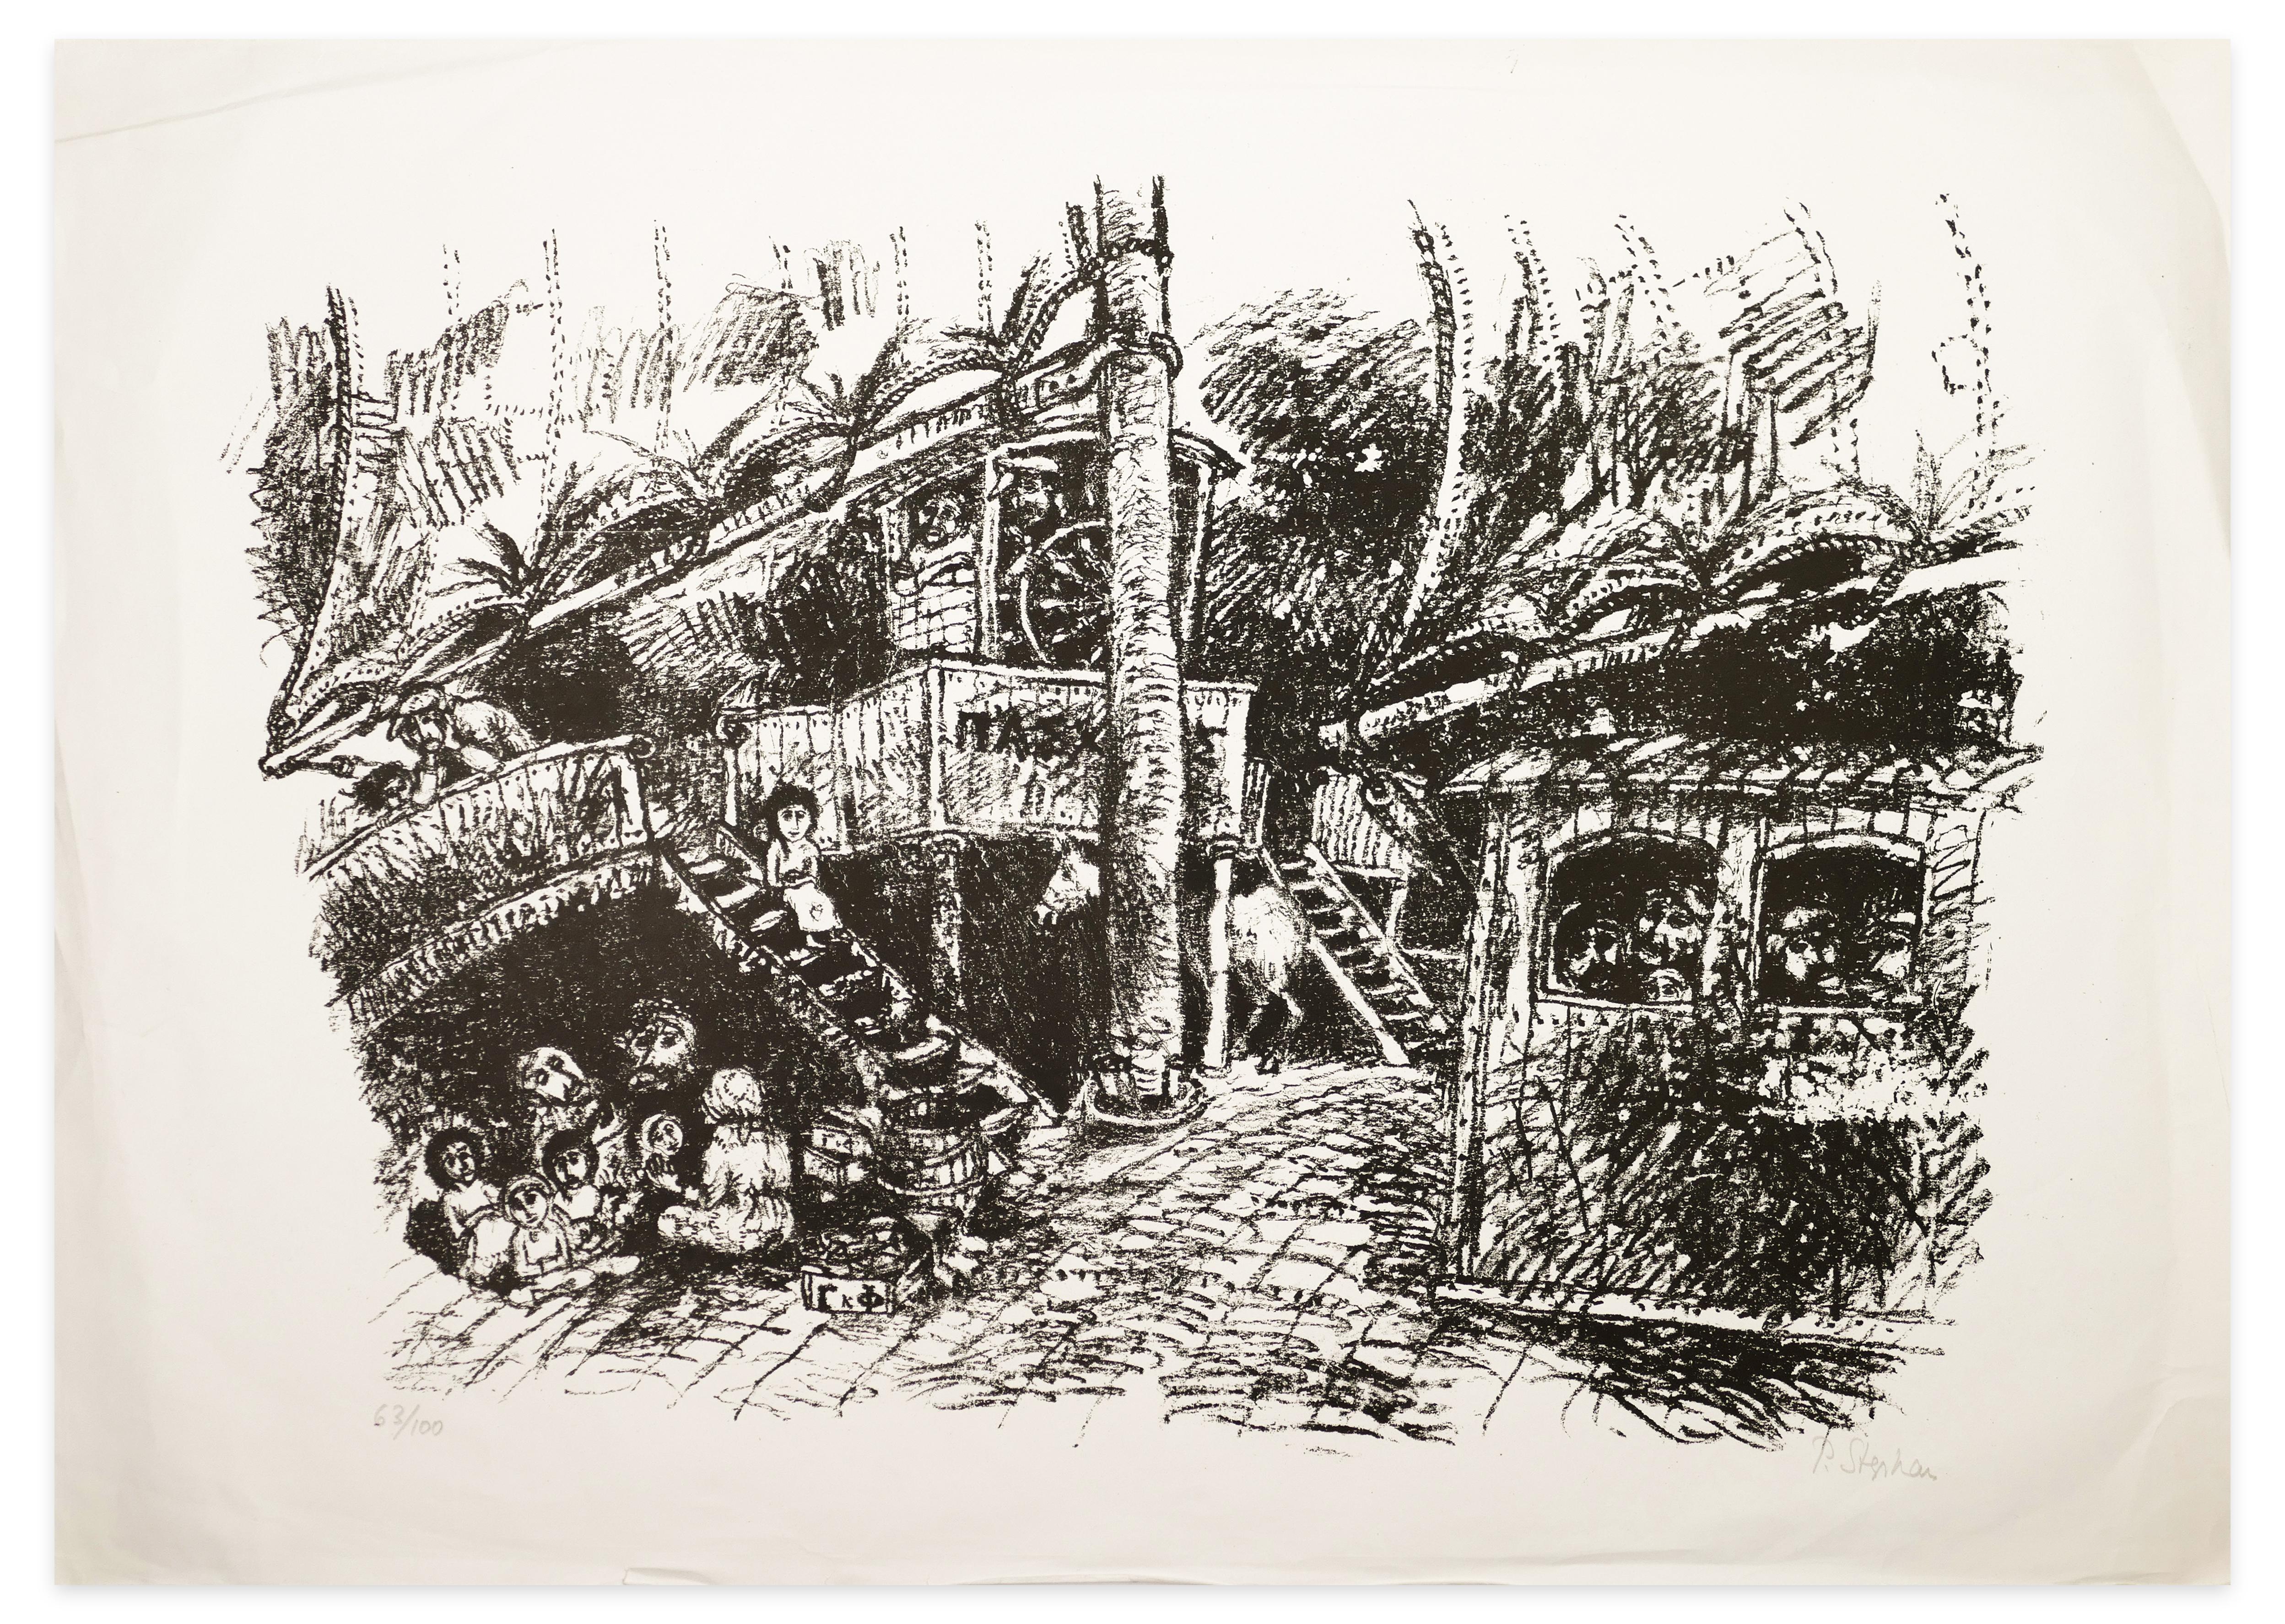 Peter Stephan Landscape Print - Illusionen - Black and White Lithograph by Peter Stephen - 1970s